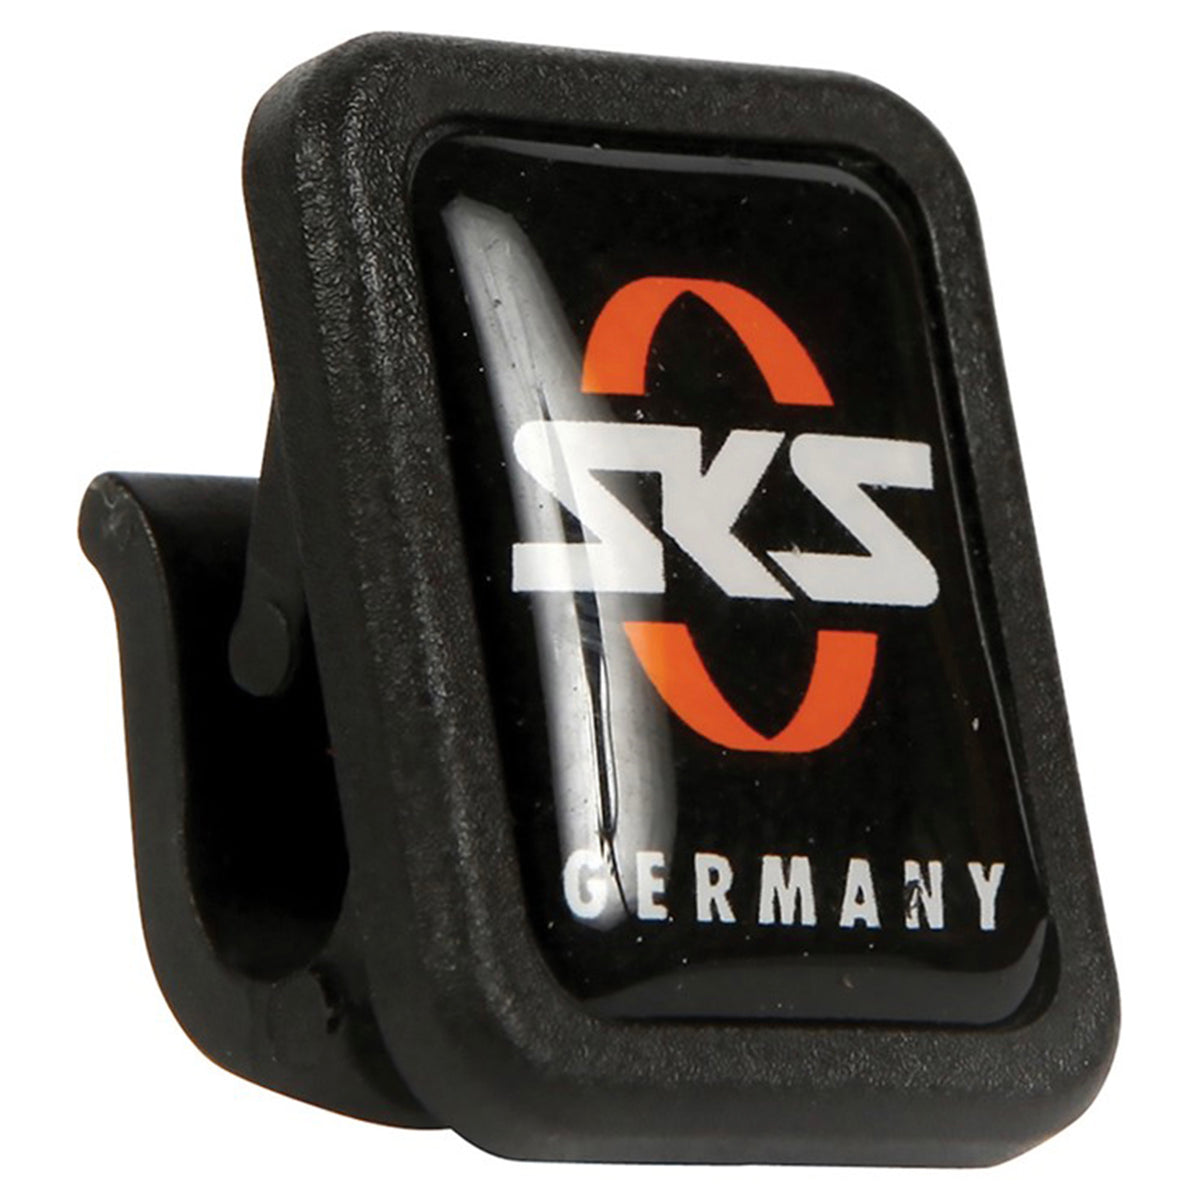 Sks U-Stay Mounting System Clip For Velo Series With Sks Lens